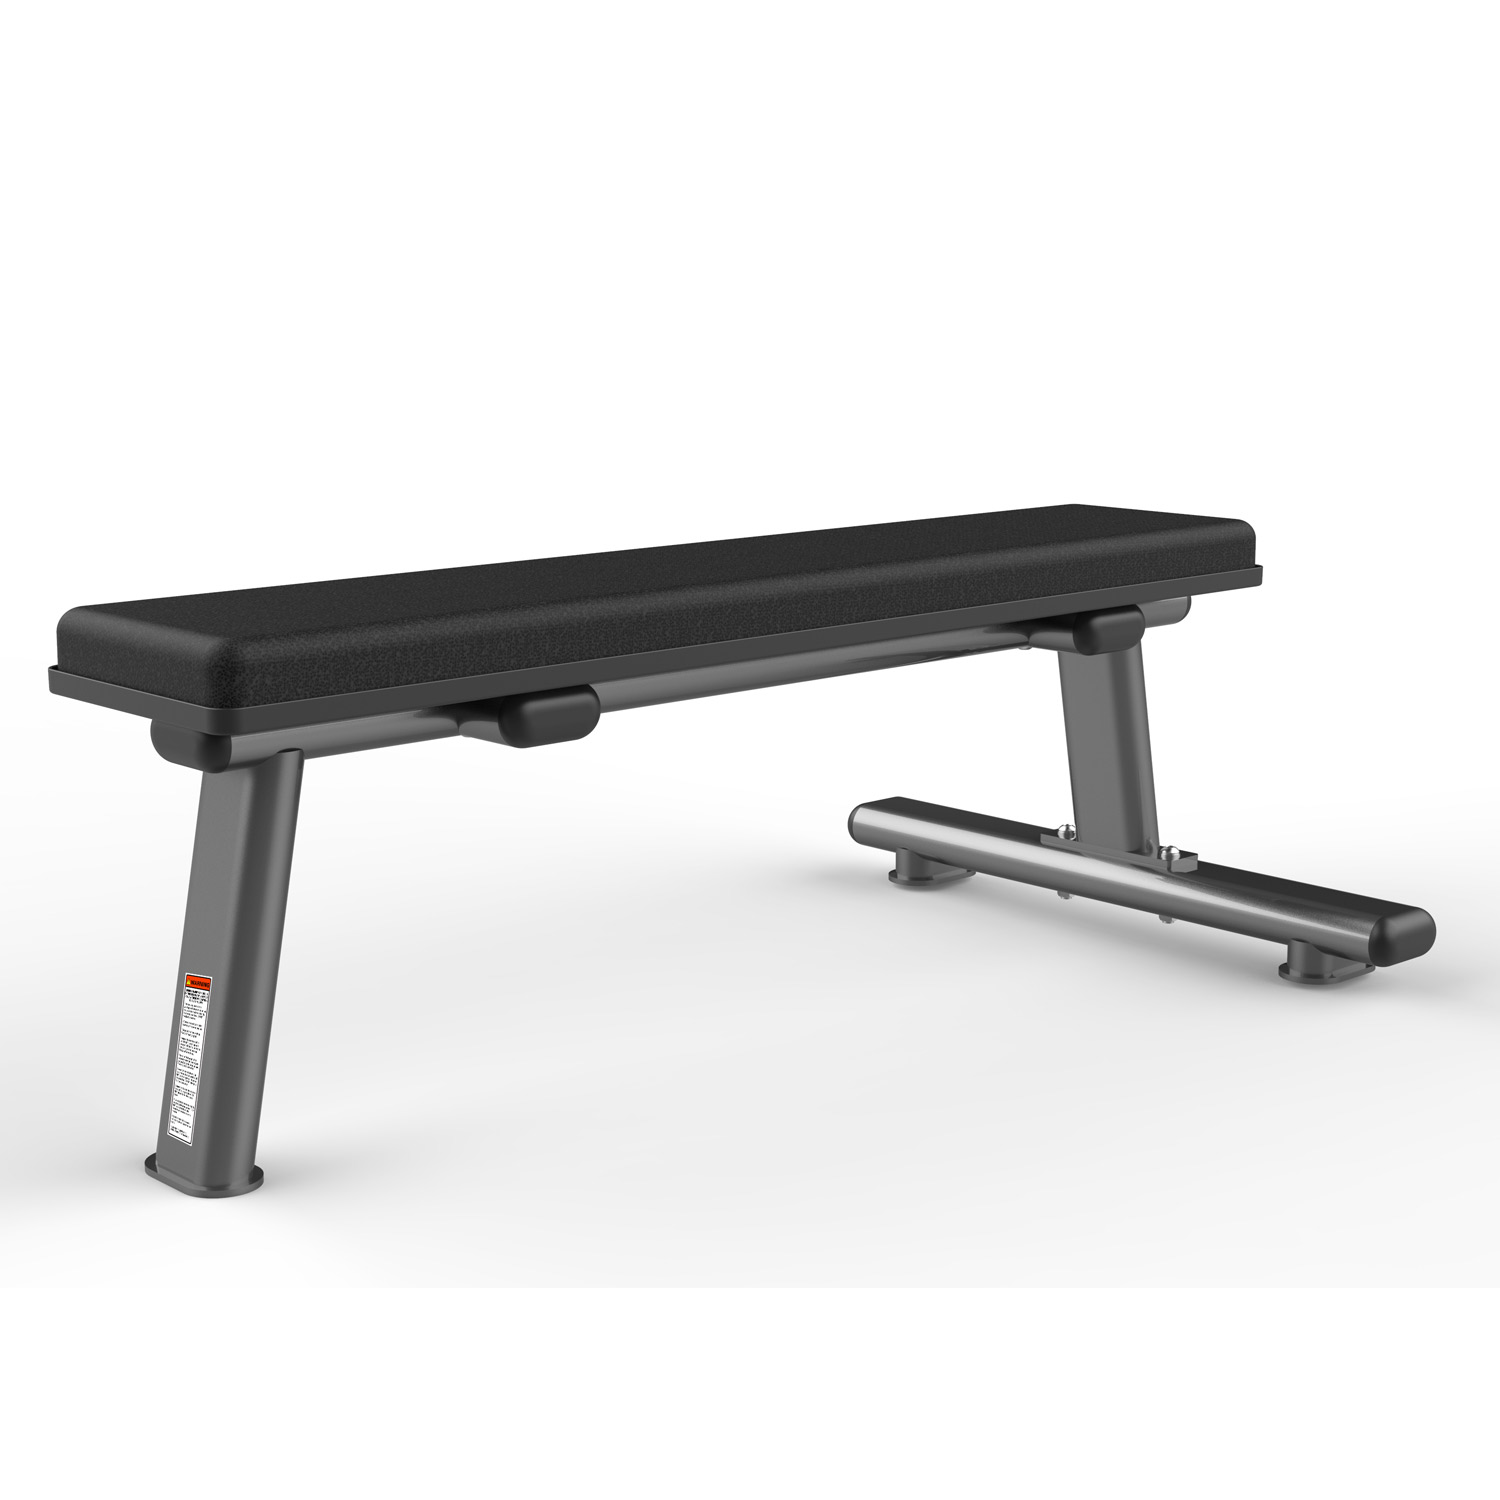 Personal Training At Home FW-1009 Flat Bench